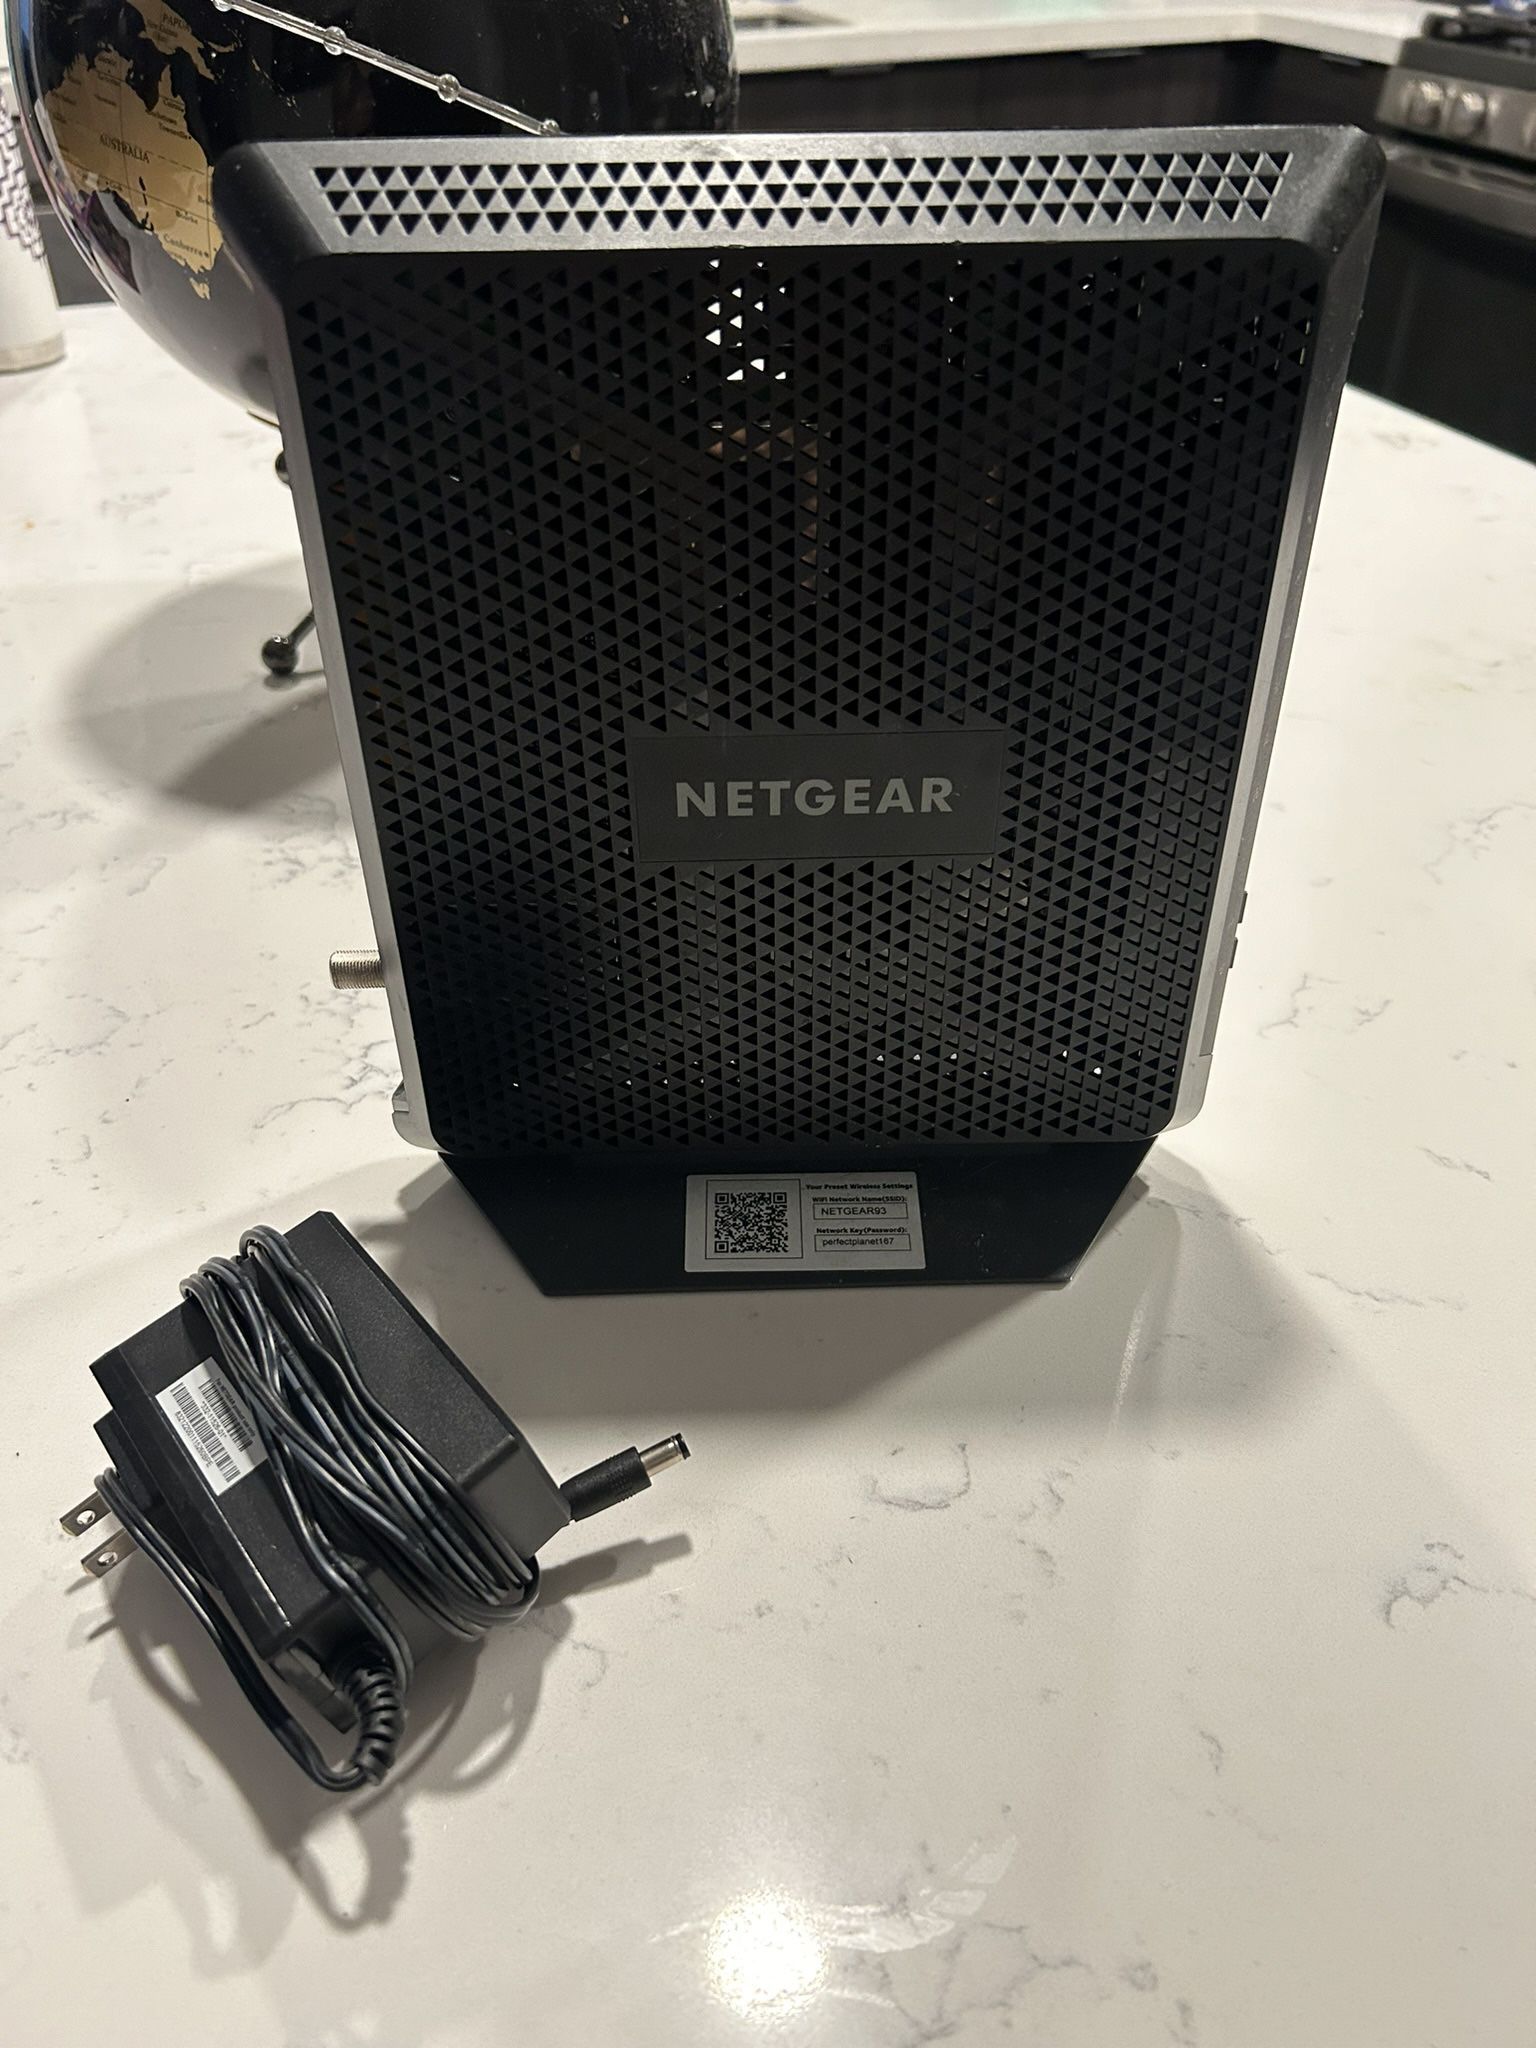 ***Moving Out Of State Sale*** Cable Modem Router